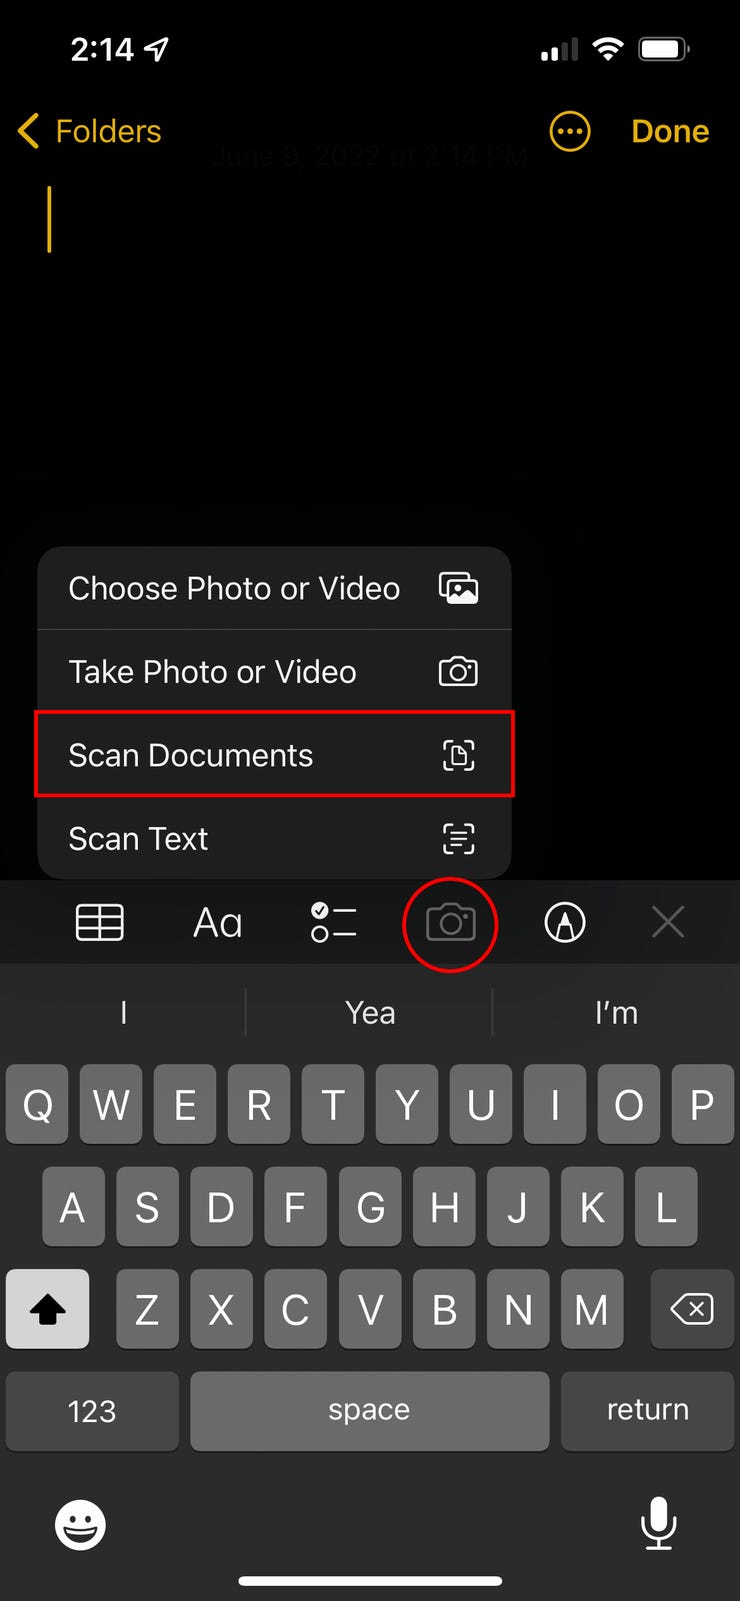 How to scan documents and images with your iPhone | ZDNET